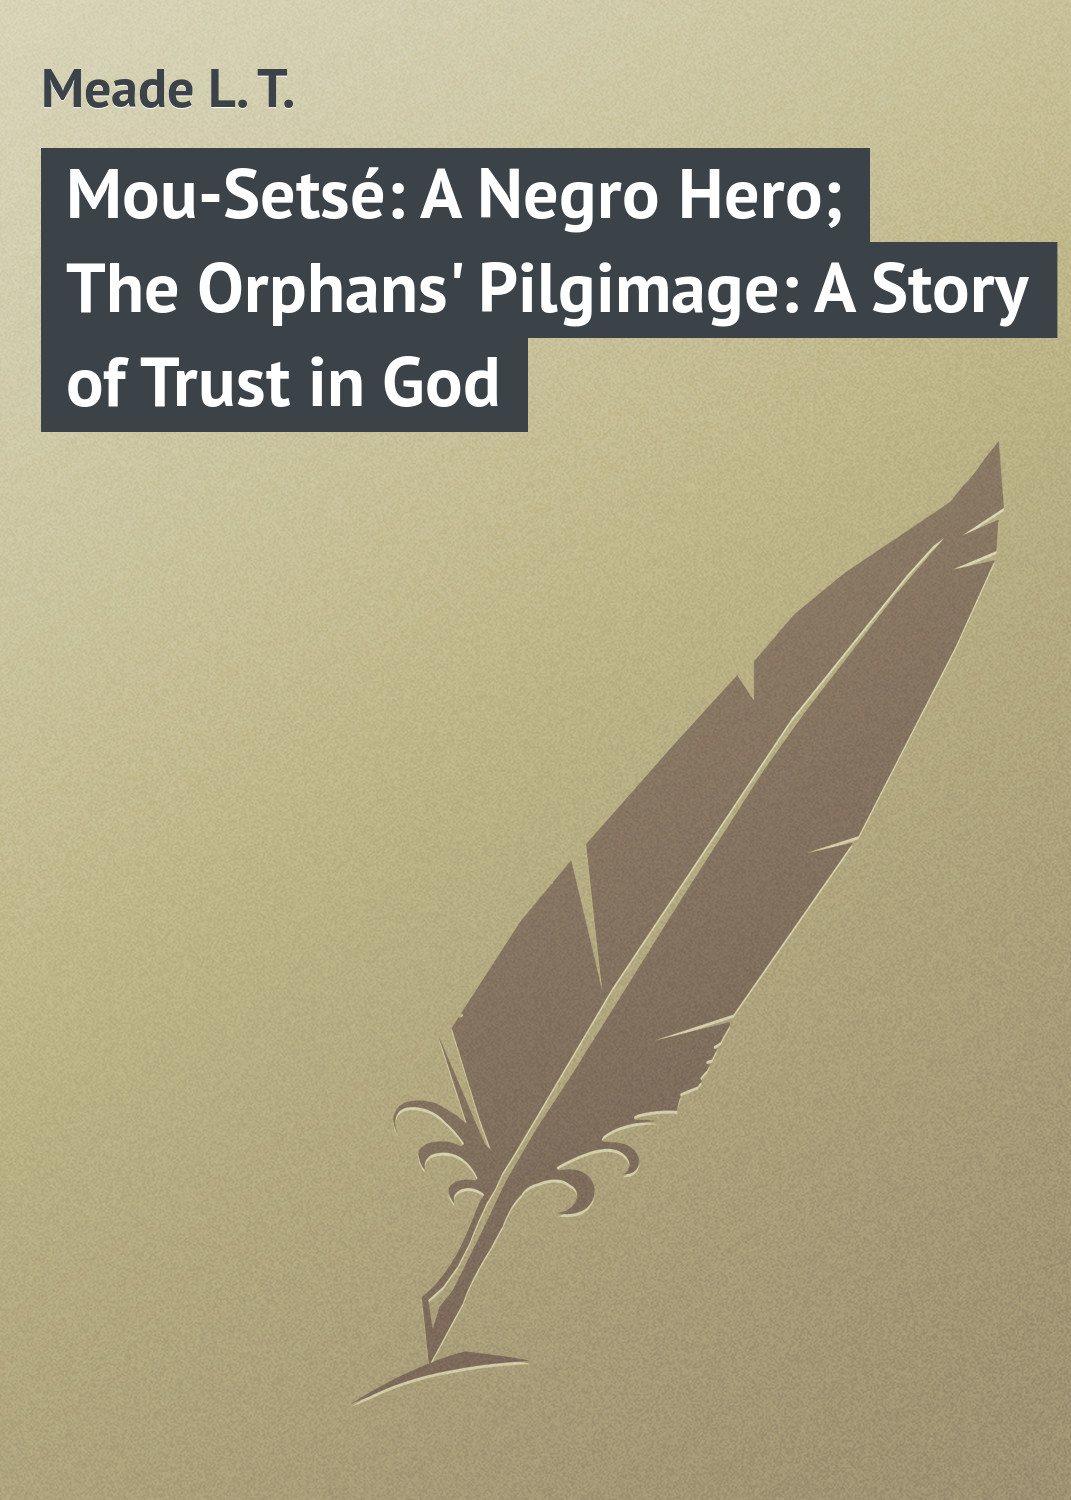 Mou-Setsé: A Negro Hero; The Orphans'Pilgimage: A Story of Trust in God